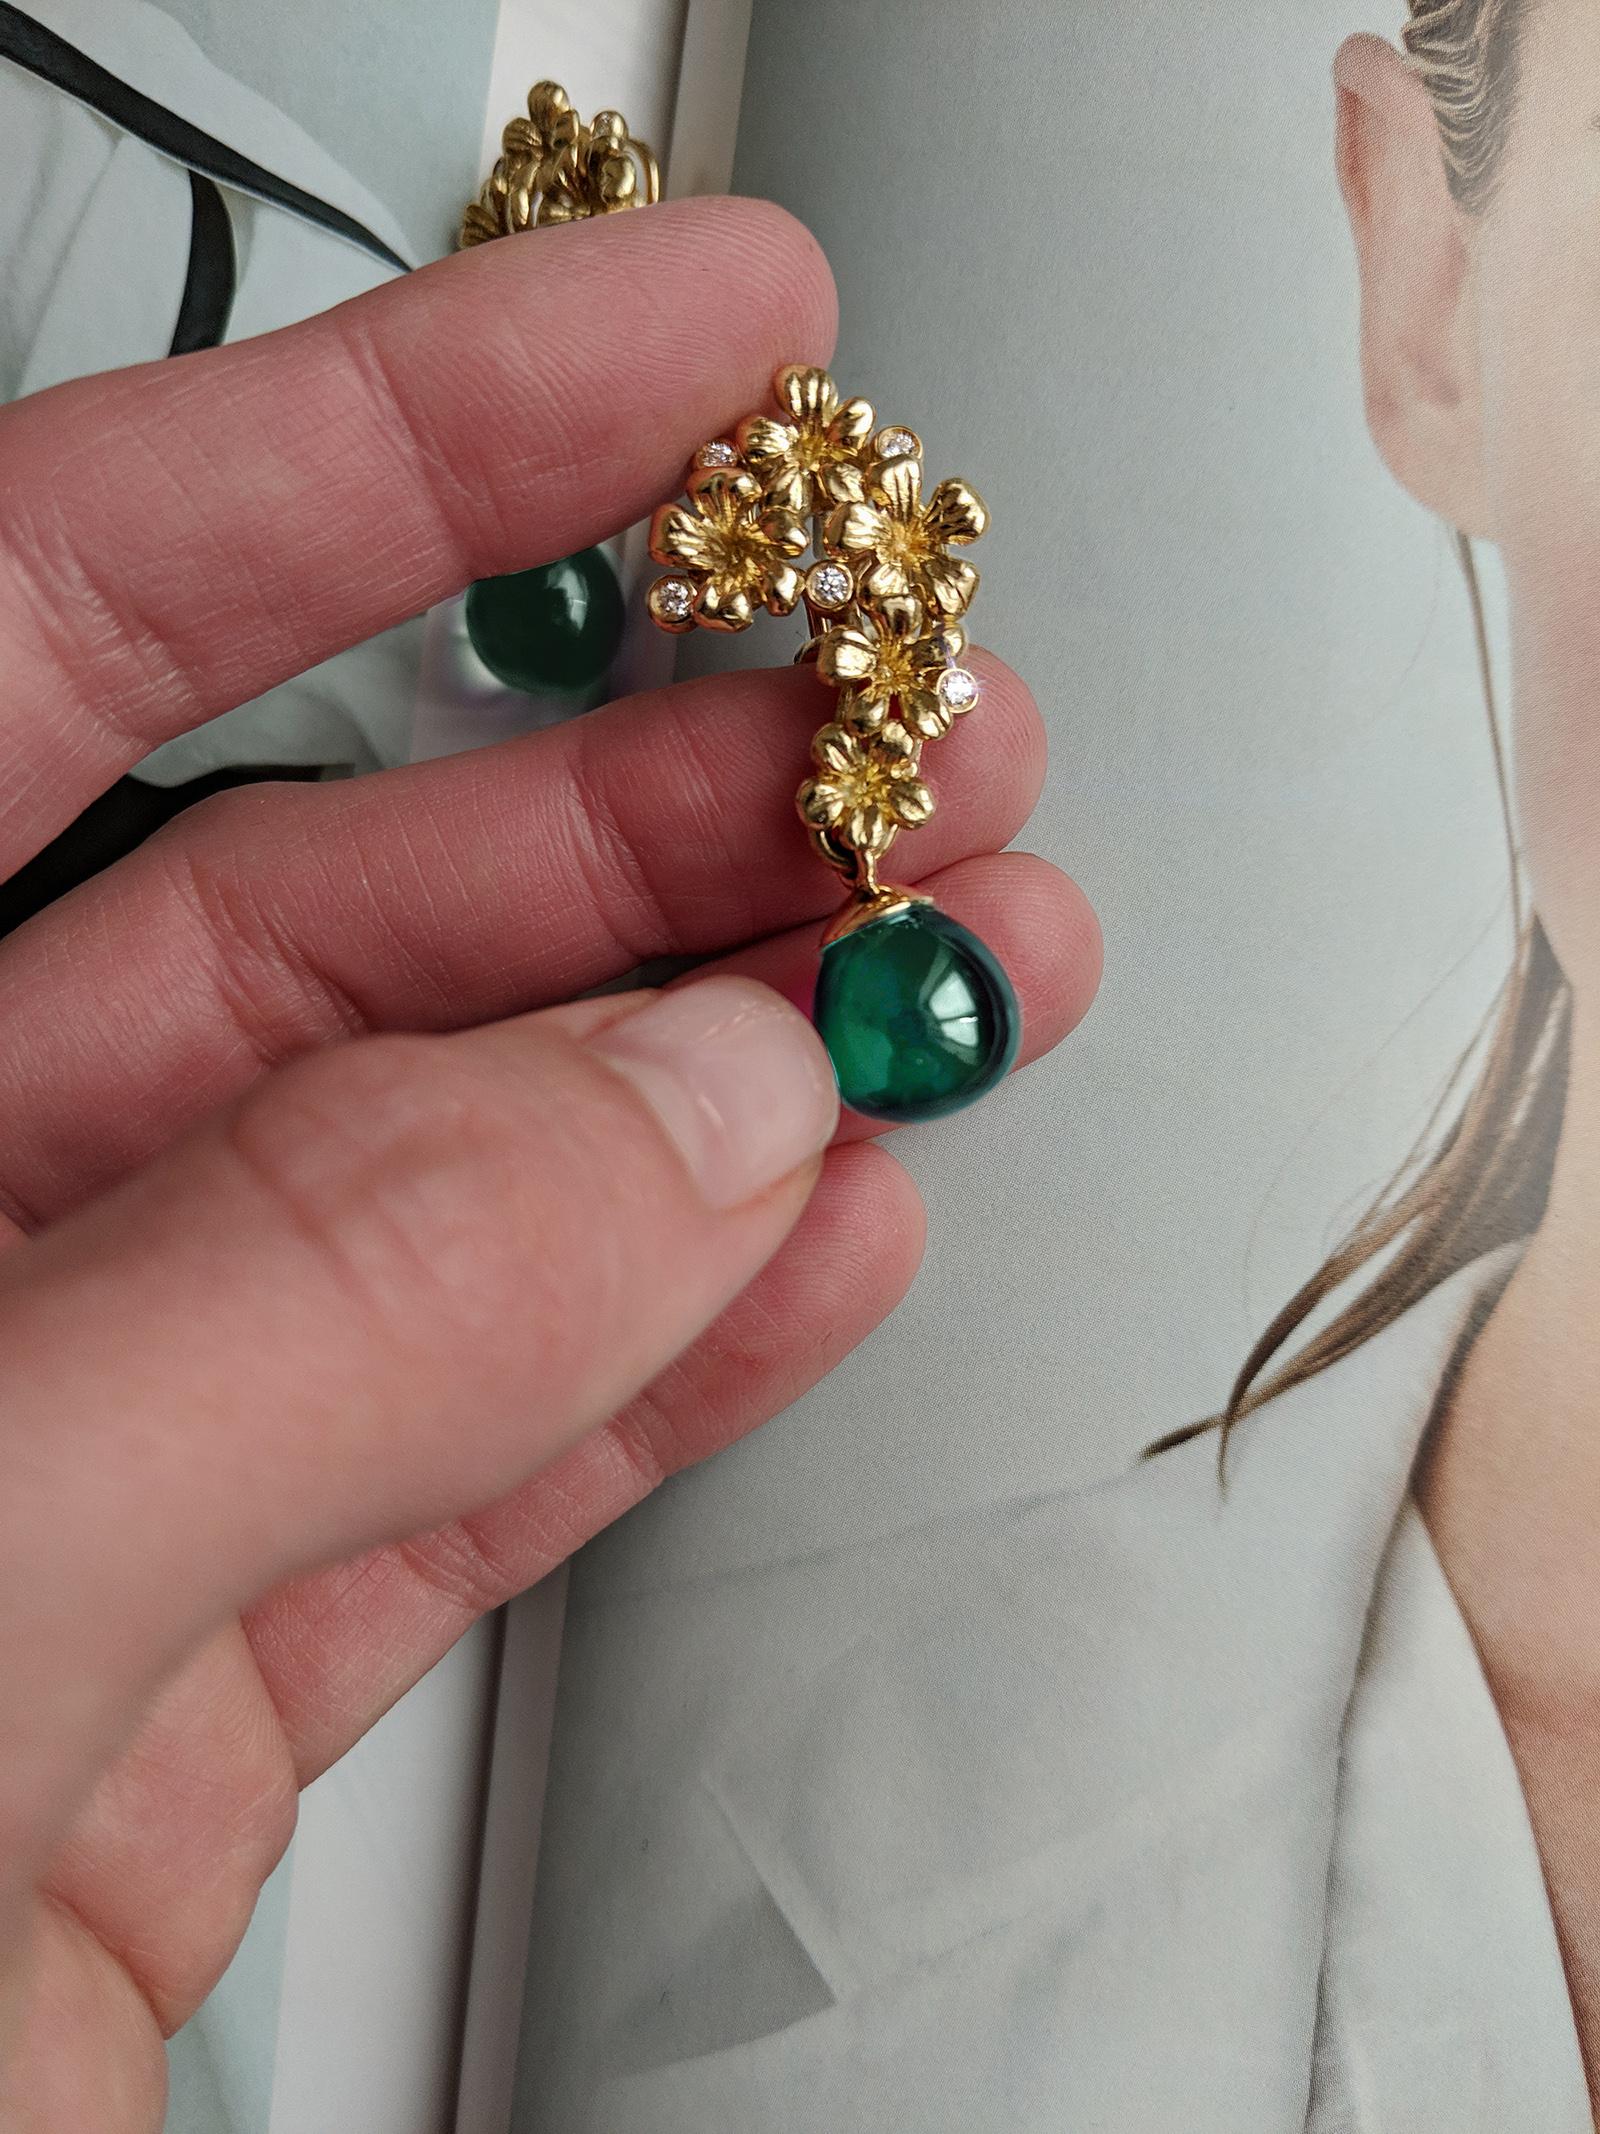 The 18 karat yellow gold Plum Blossom brooch is encrusted with 5 round diamonds and a green cabochon removable drop of natural emerald. This contemporary jewellery collection has been featured in a review by Vogue UA. We use top-quality natural